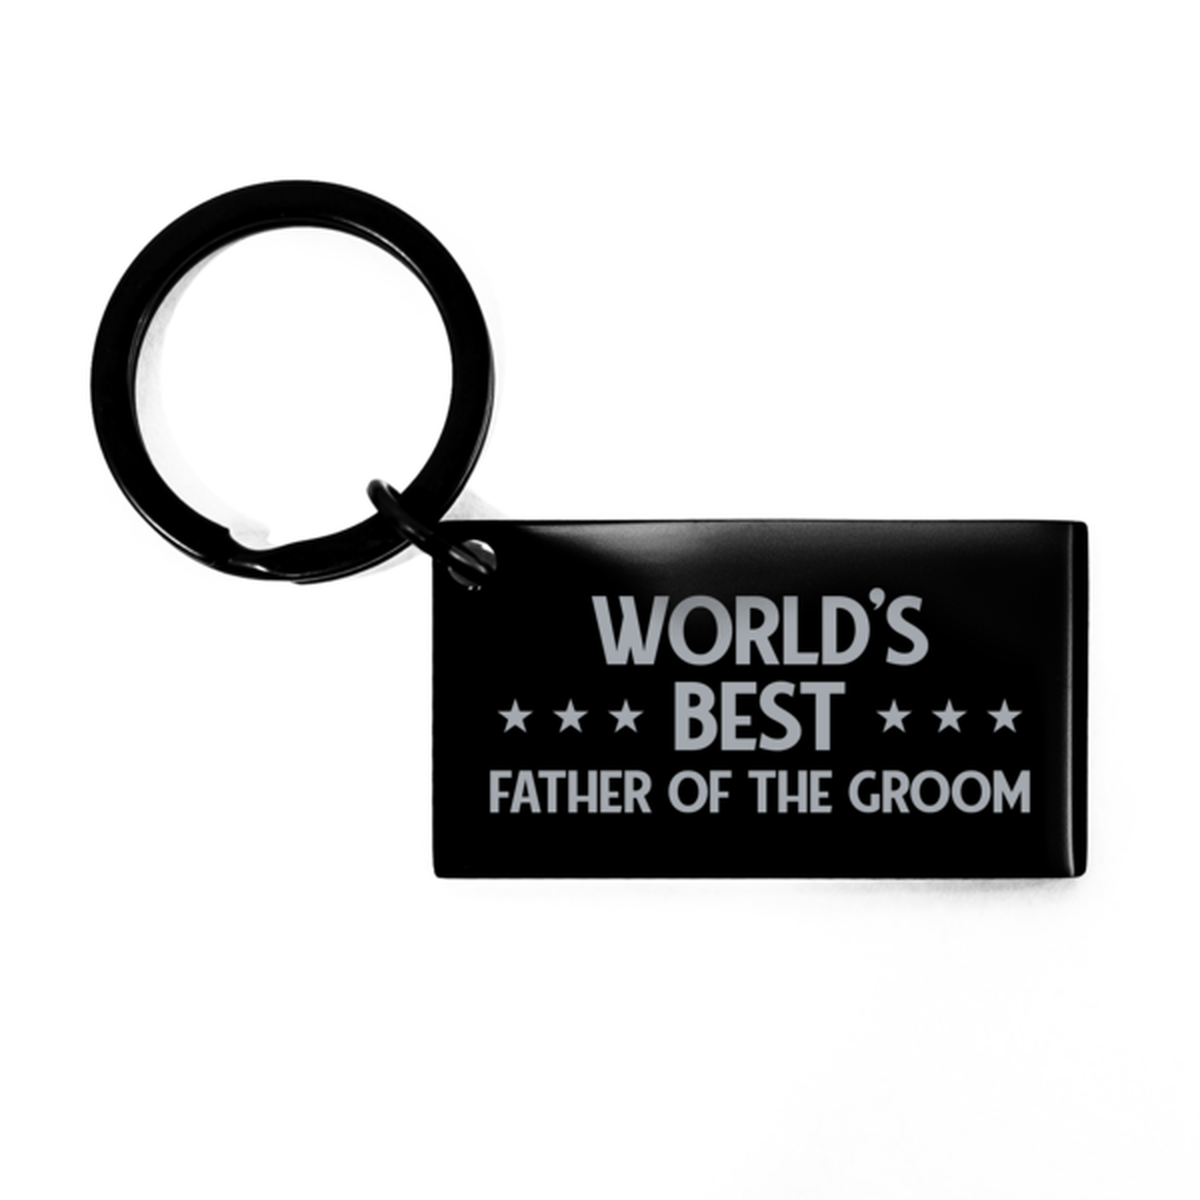 Worlds Best Father of the groom Gifts, Funny Black Engraved Keychain For Father of the groom, Birthday Presents For Men